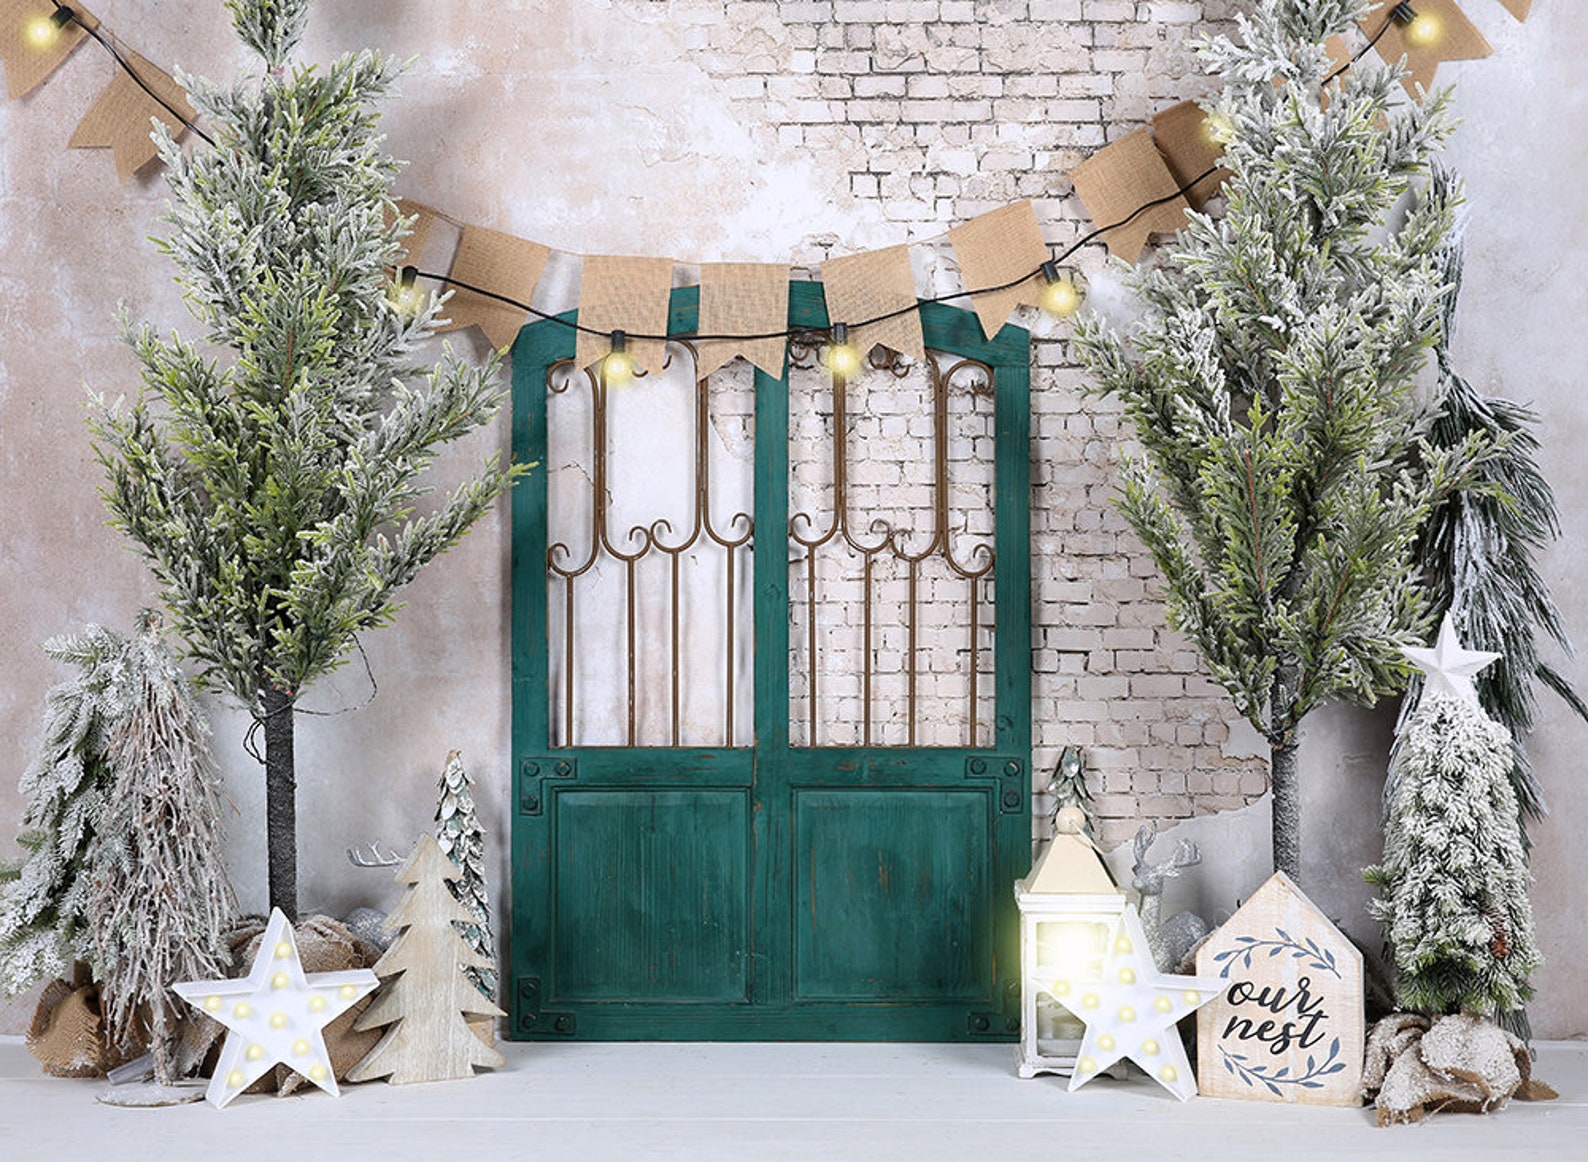 Fabric Christmas Backdrops: The Top 10 Creative Ways to Use Them for Holiday Photos